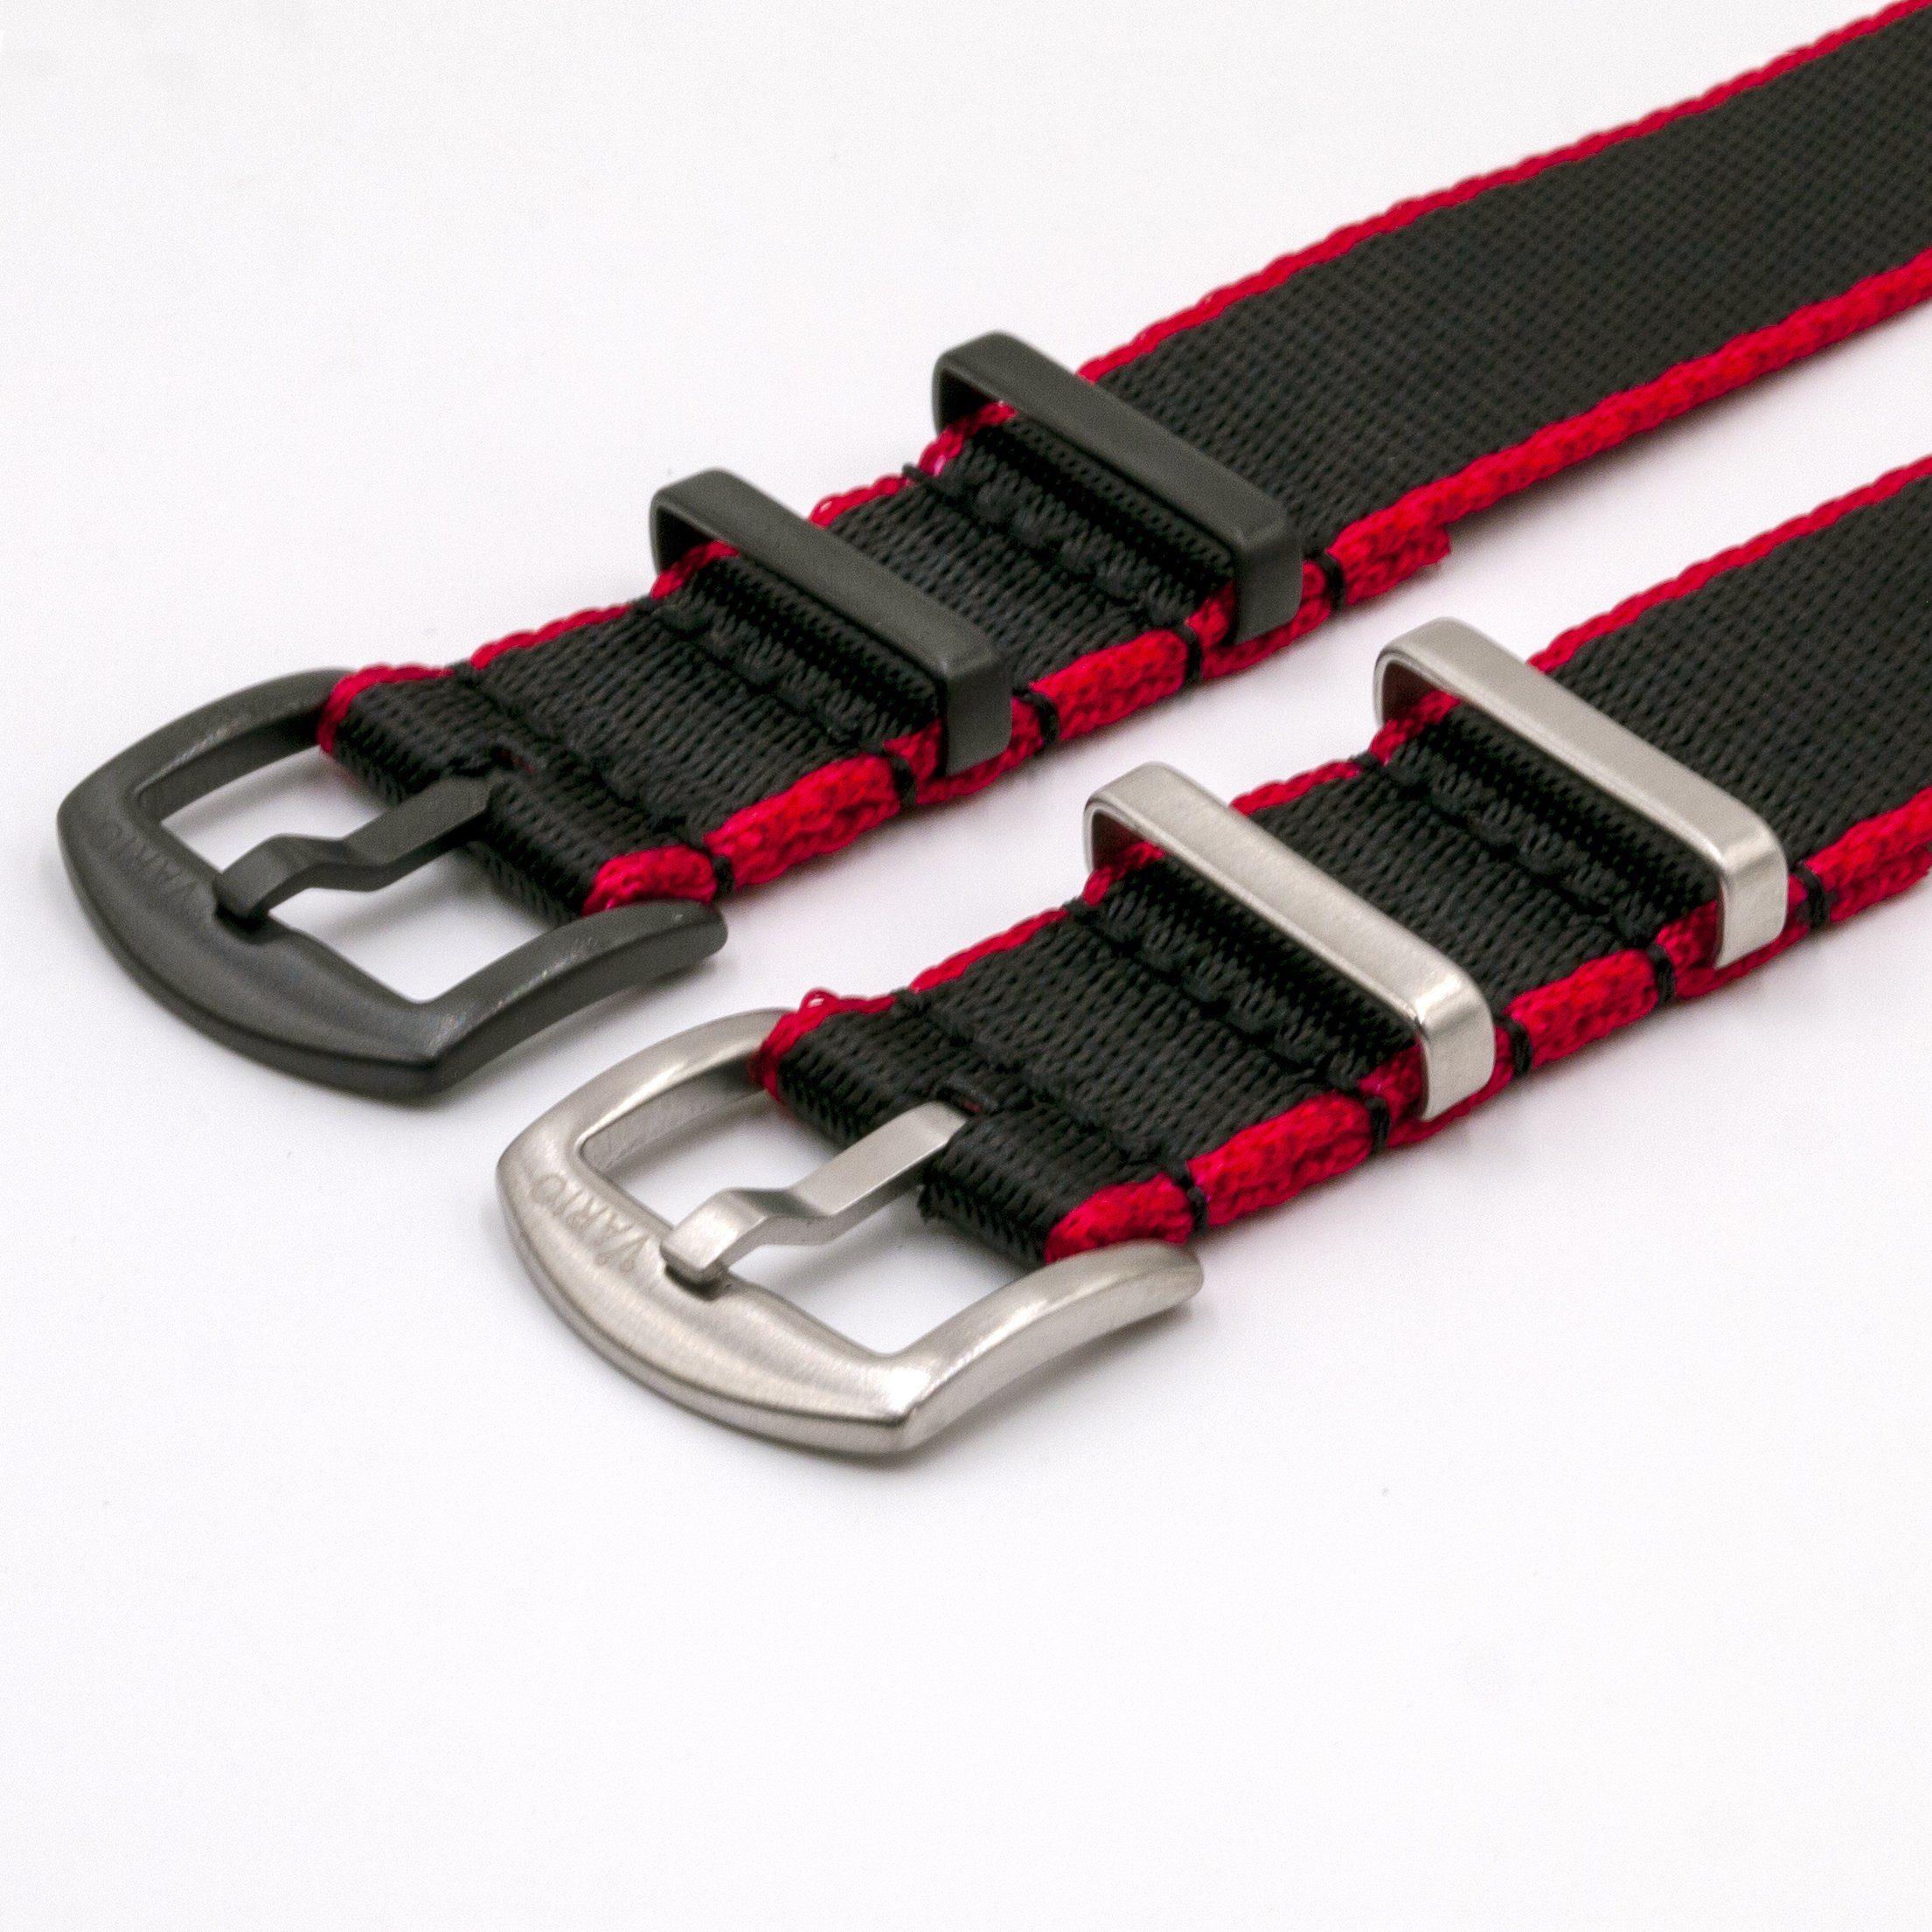 gshock vario seat belt adapter kit red and black silver and black buckle